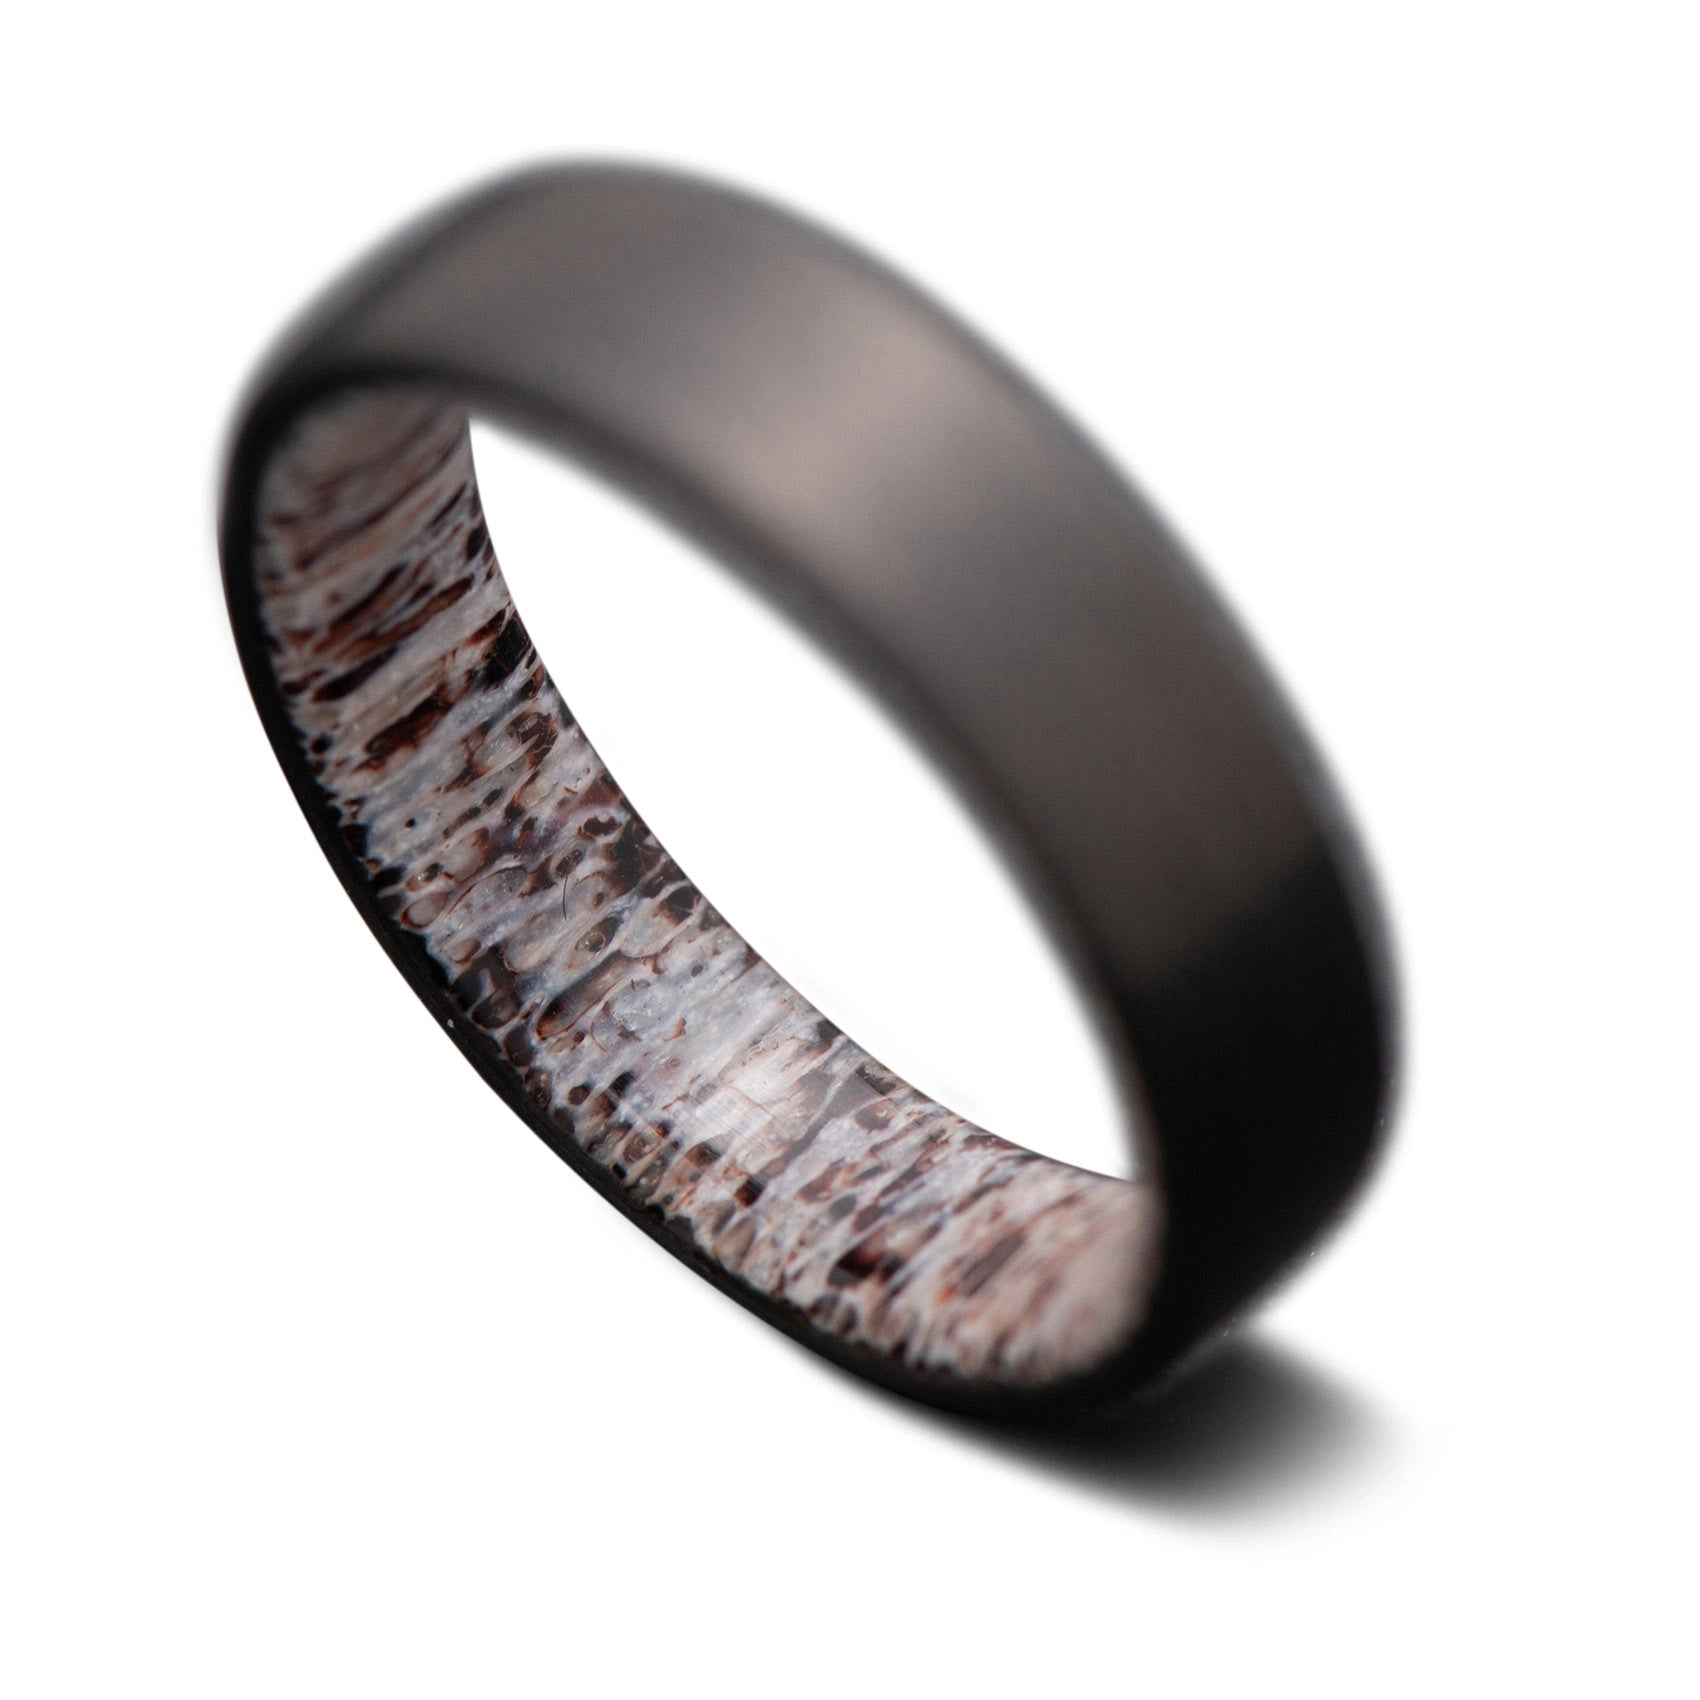 Back of CarbonUni Core Ring with Deer Antler inner sleeve and matte finish, 5mm -THE QUANTUM